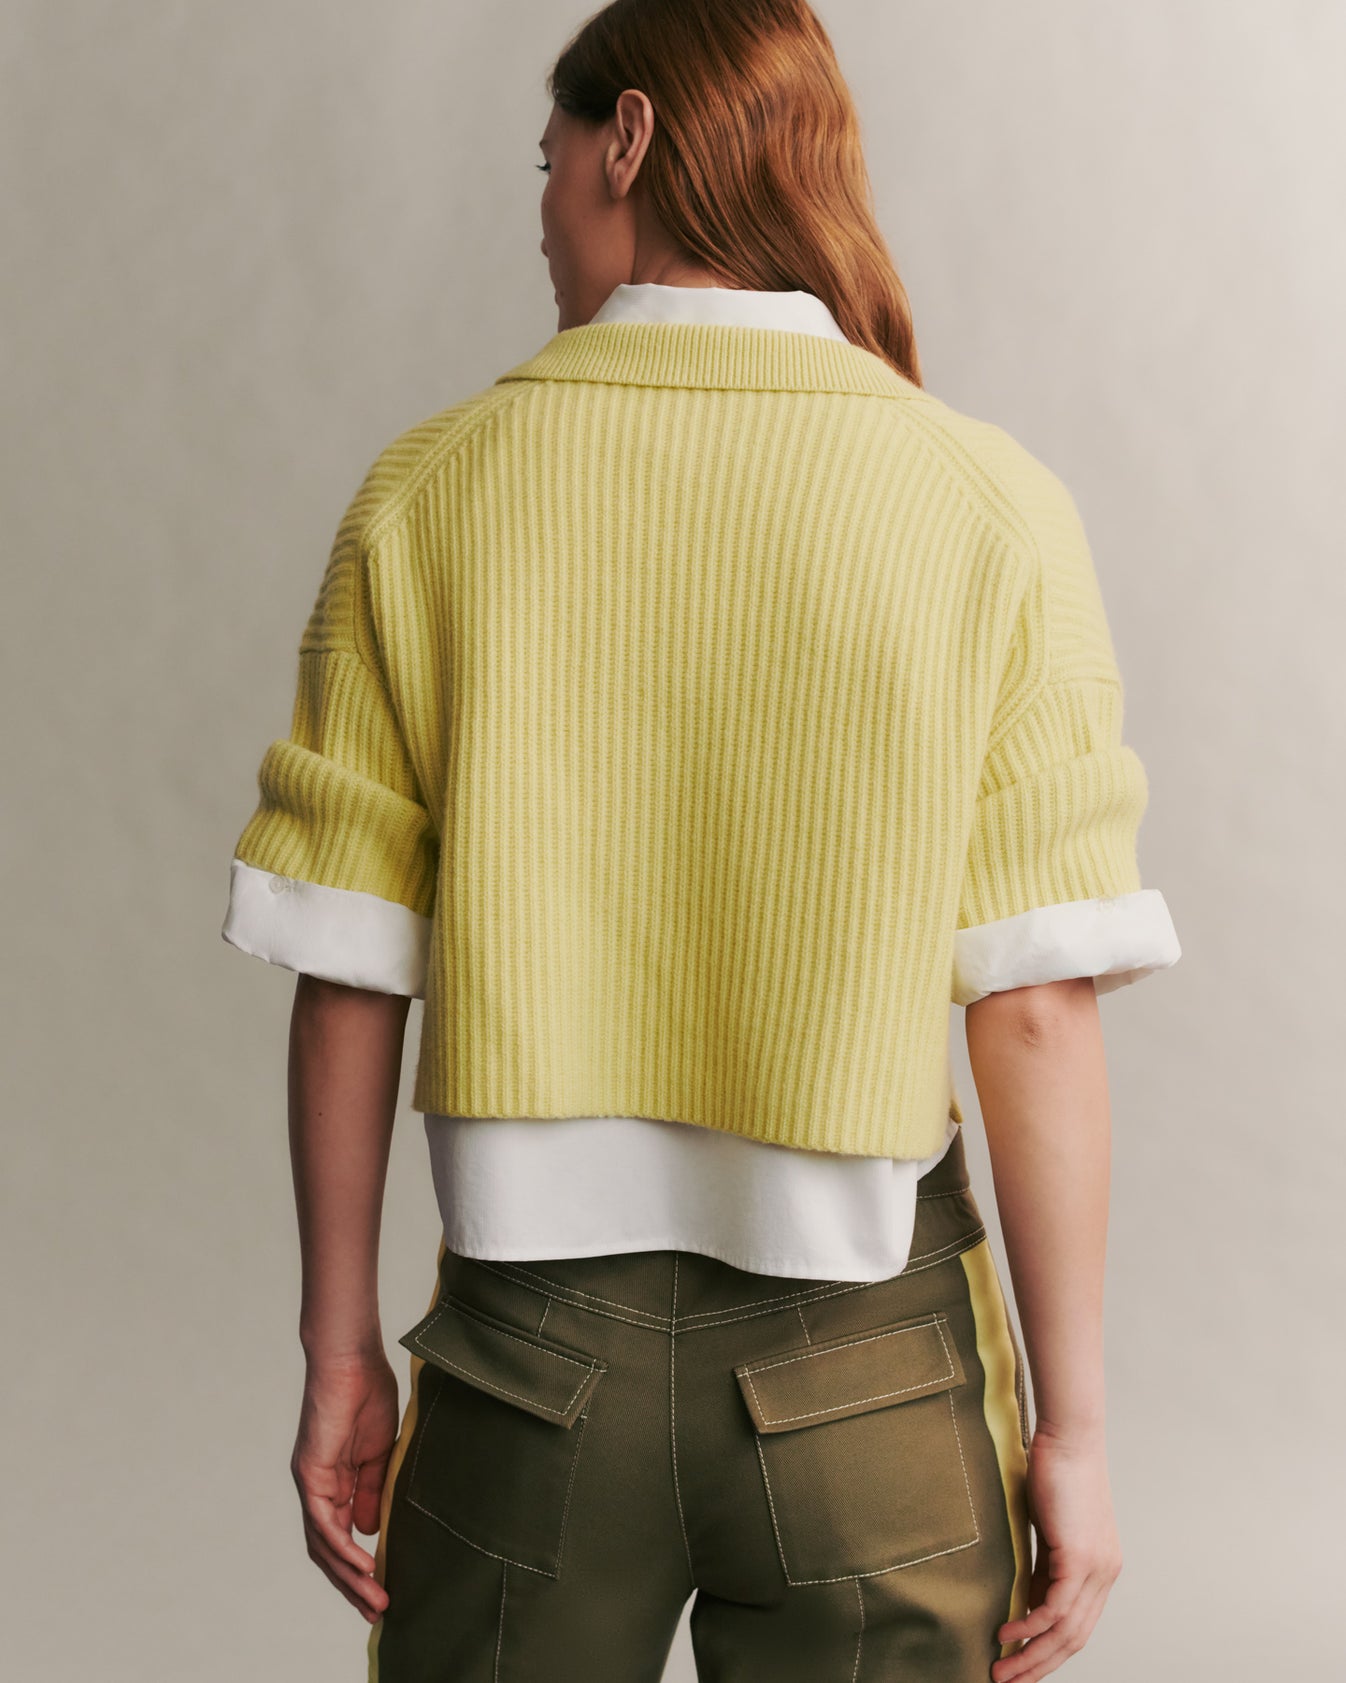 TWP Charlock Tallulah Sweater in Cashmere view 4